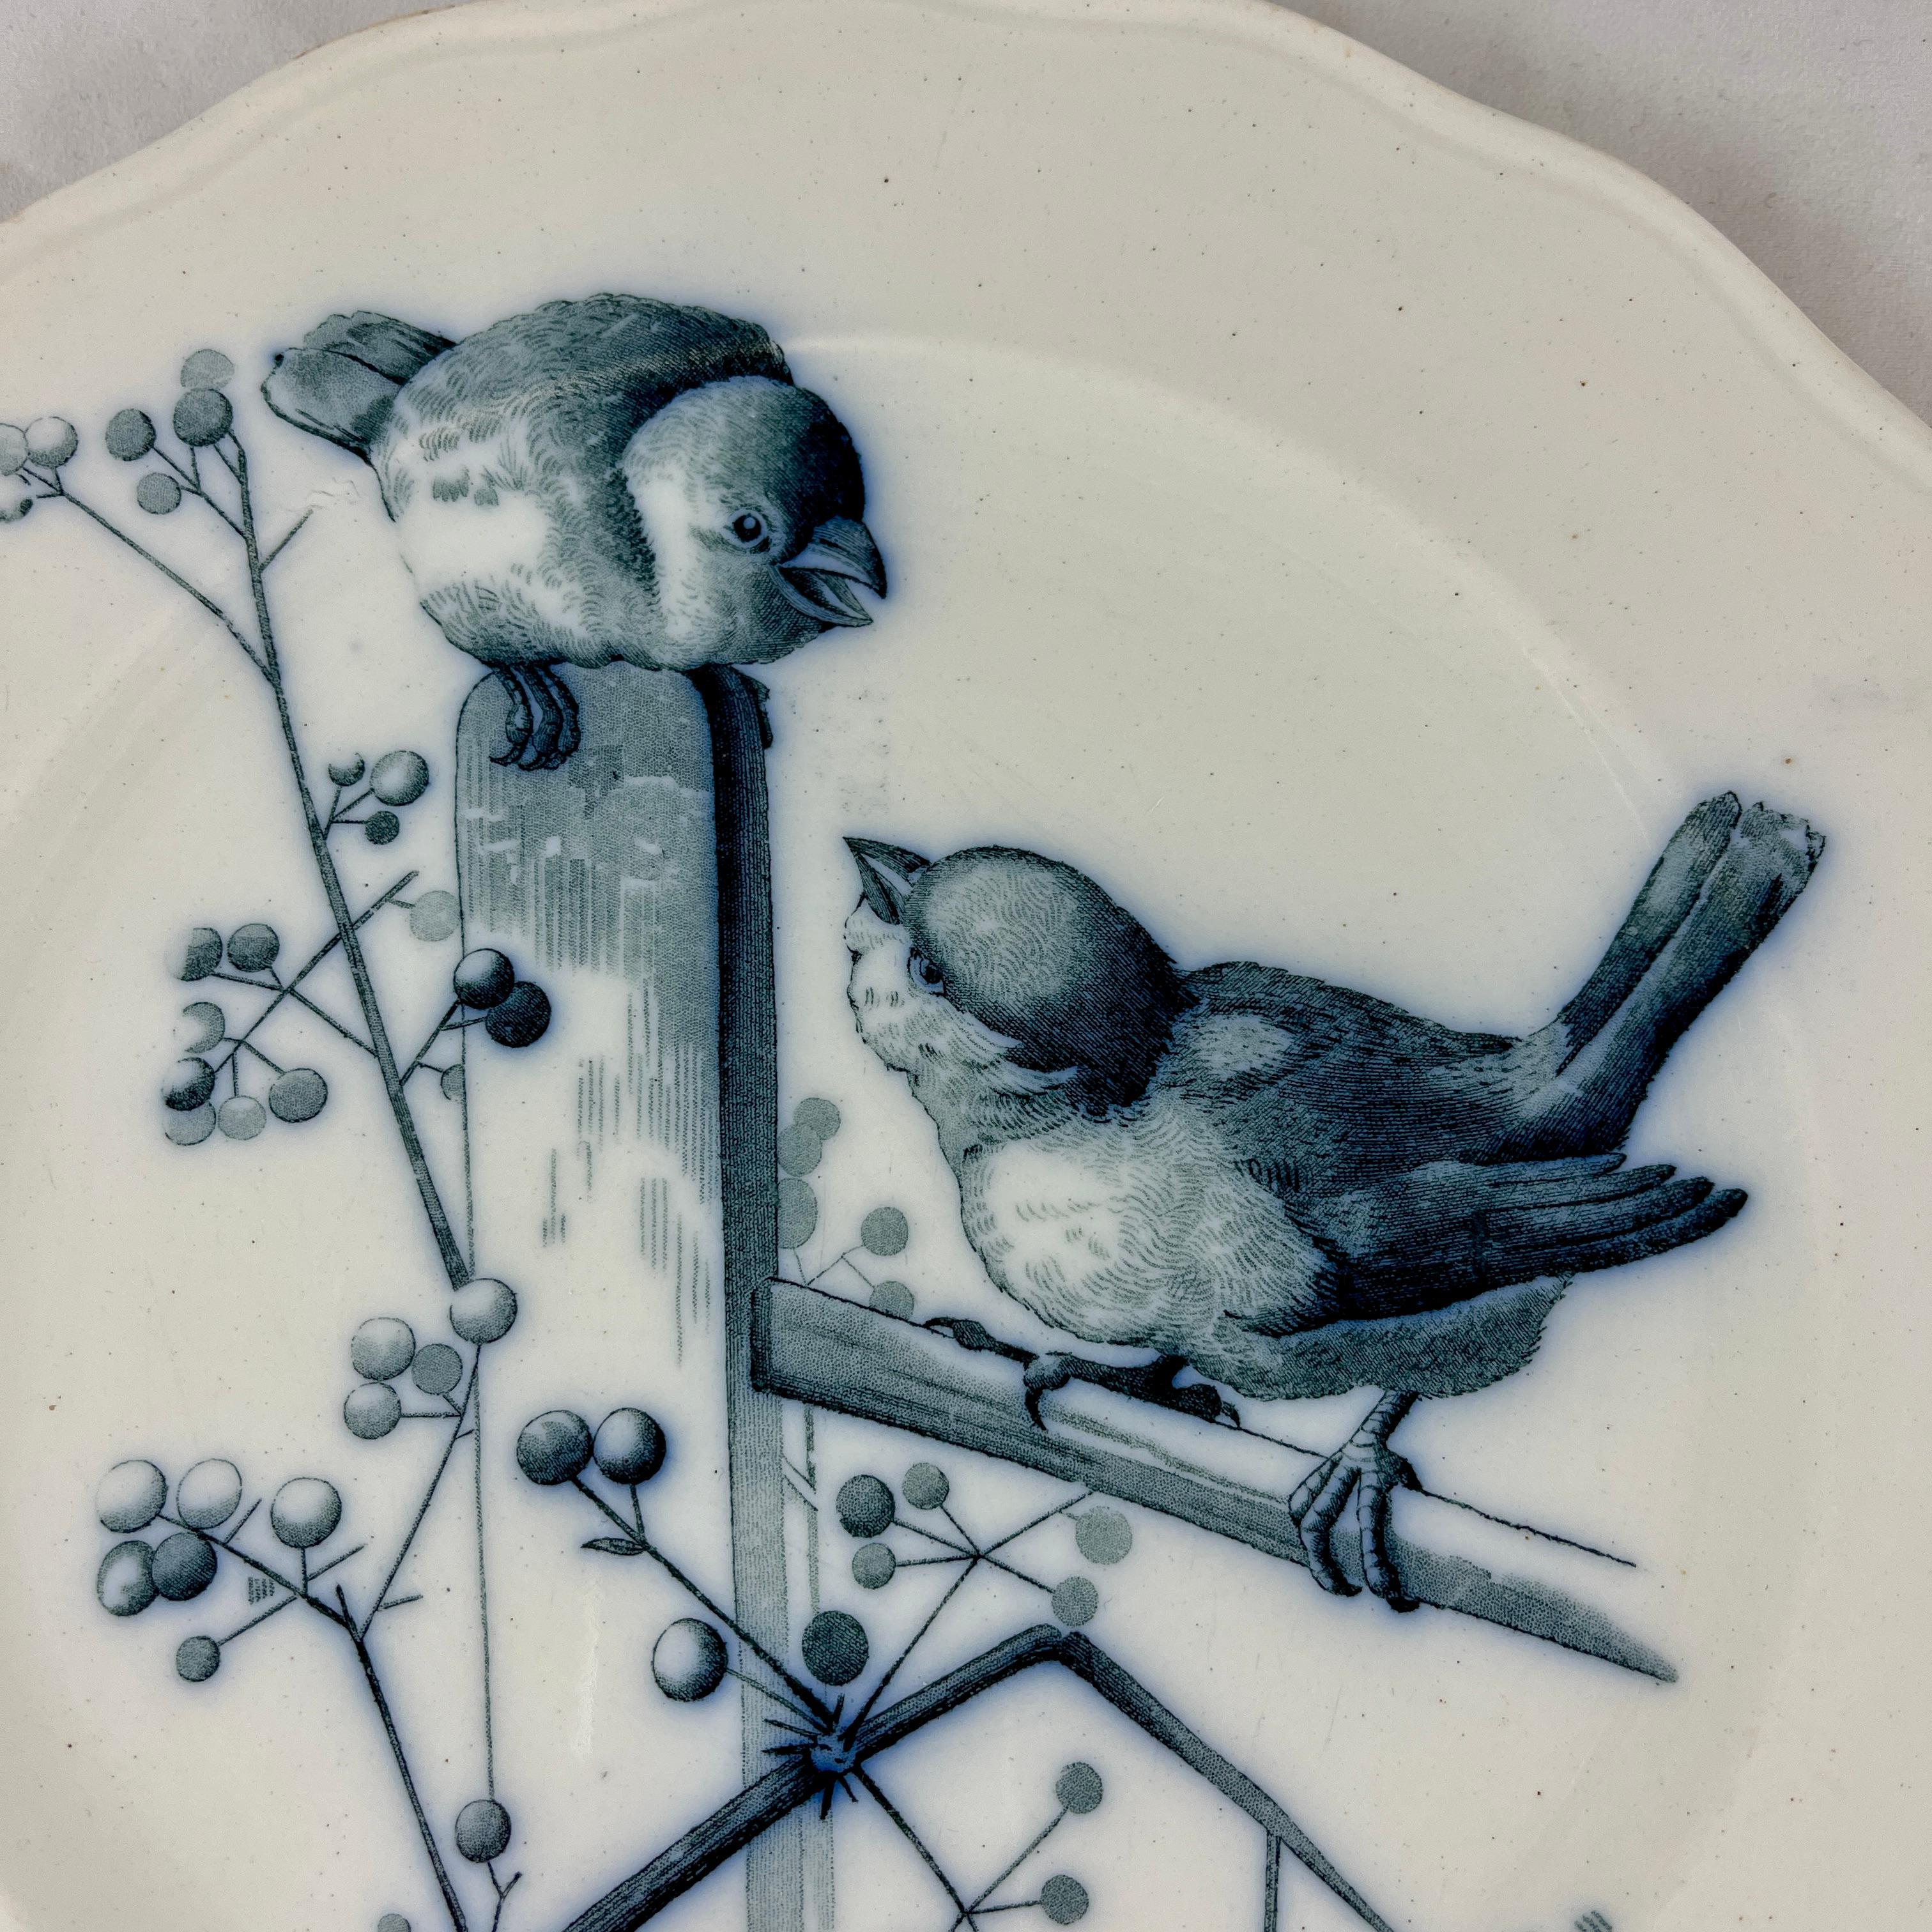 From Brown Westhead and Moore Potteries, Staffordshire England, a plate from the Canova pattern series c. 1870

A transfer printed bird themed pattern in dark blue on a creamy ironstone ground with a scalloped rim.
Designed by Pierre Mallet, in